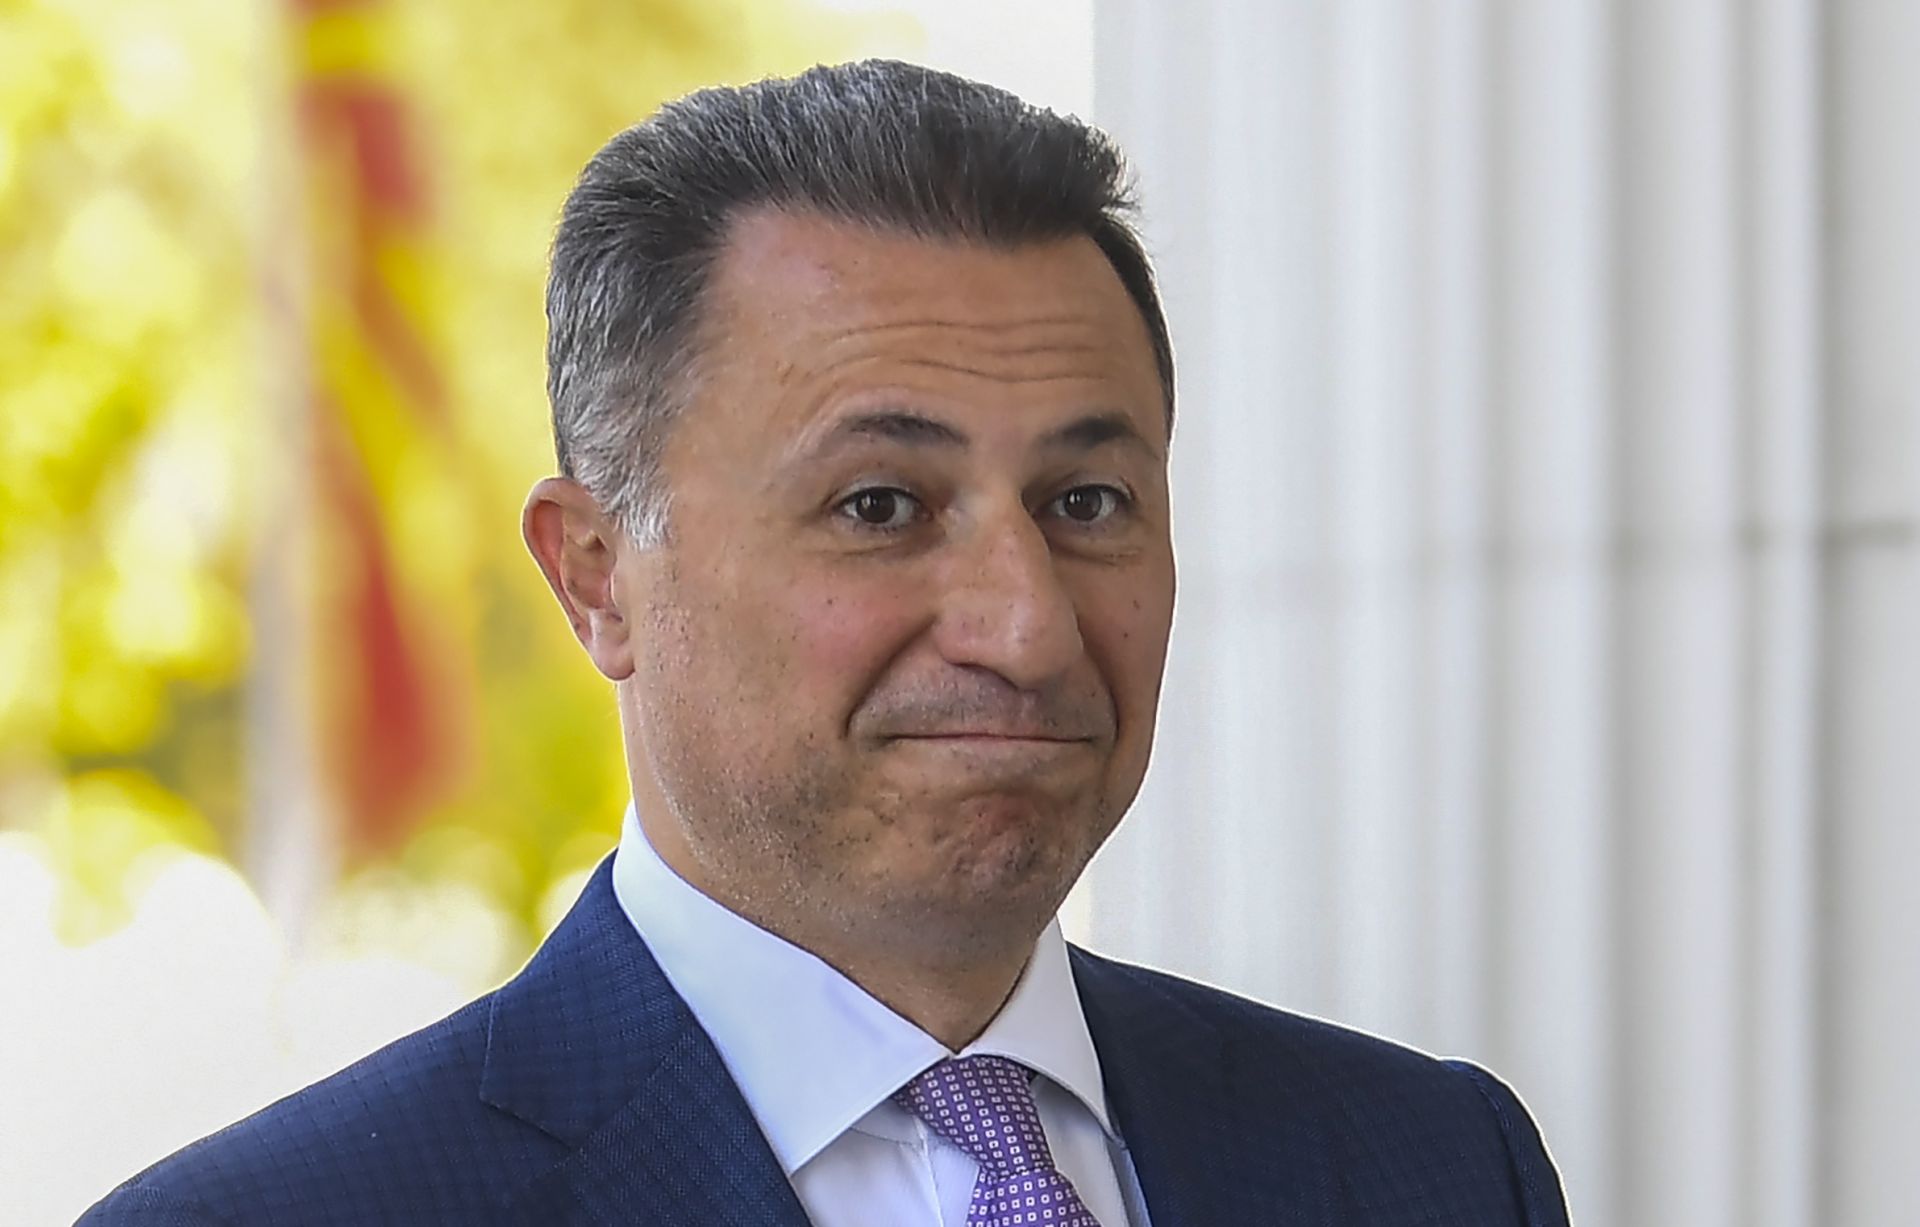 epa07161429 (FILE) - FYR of Macedonia ex-prime minister Nikola Gruevski arrives in the court in Skopje, The Former Yugoslav Republic of Macedonia on 05 October 2018 (reissued on 12 November 2018). According to reports, the Macedonian police has issued an arrest warrant for former prime minister Nikola Gruevski after he failed to report to jail to serve a prison sentence of two years for misusing the official position. The Skopje Court of Appeal in October has confirmed a two-year prison term for the ex- prime minister, for abuse in the procurement of the bulletproof Mercedes of 600,000 euros.  EPA/GEORGI LICOVSKI *** Local Caption *** 54678598